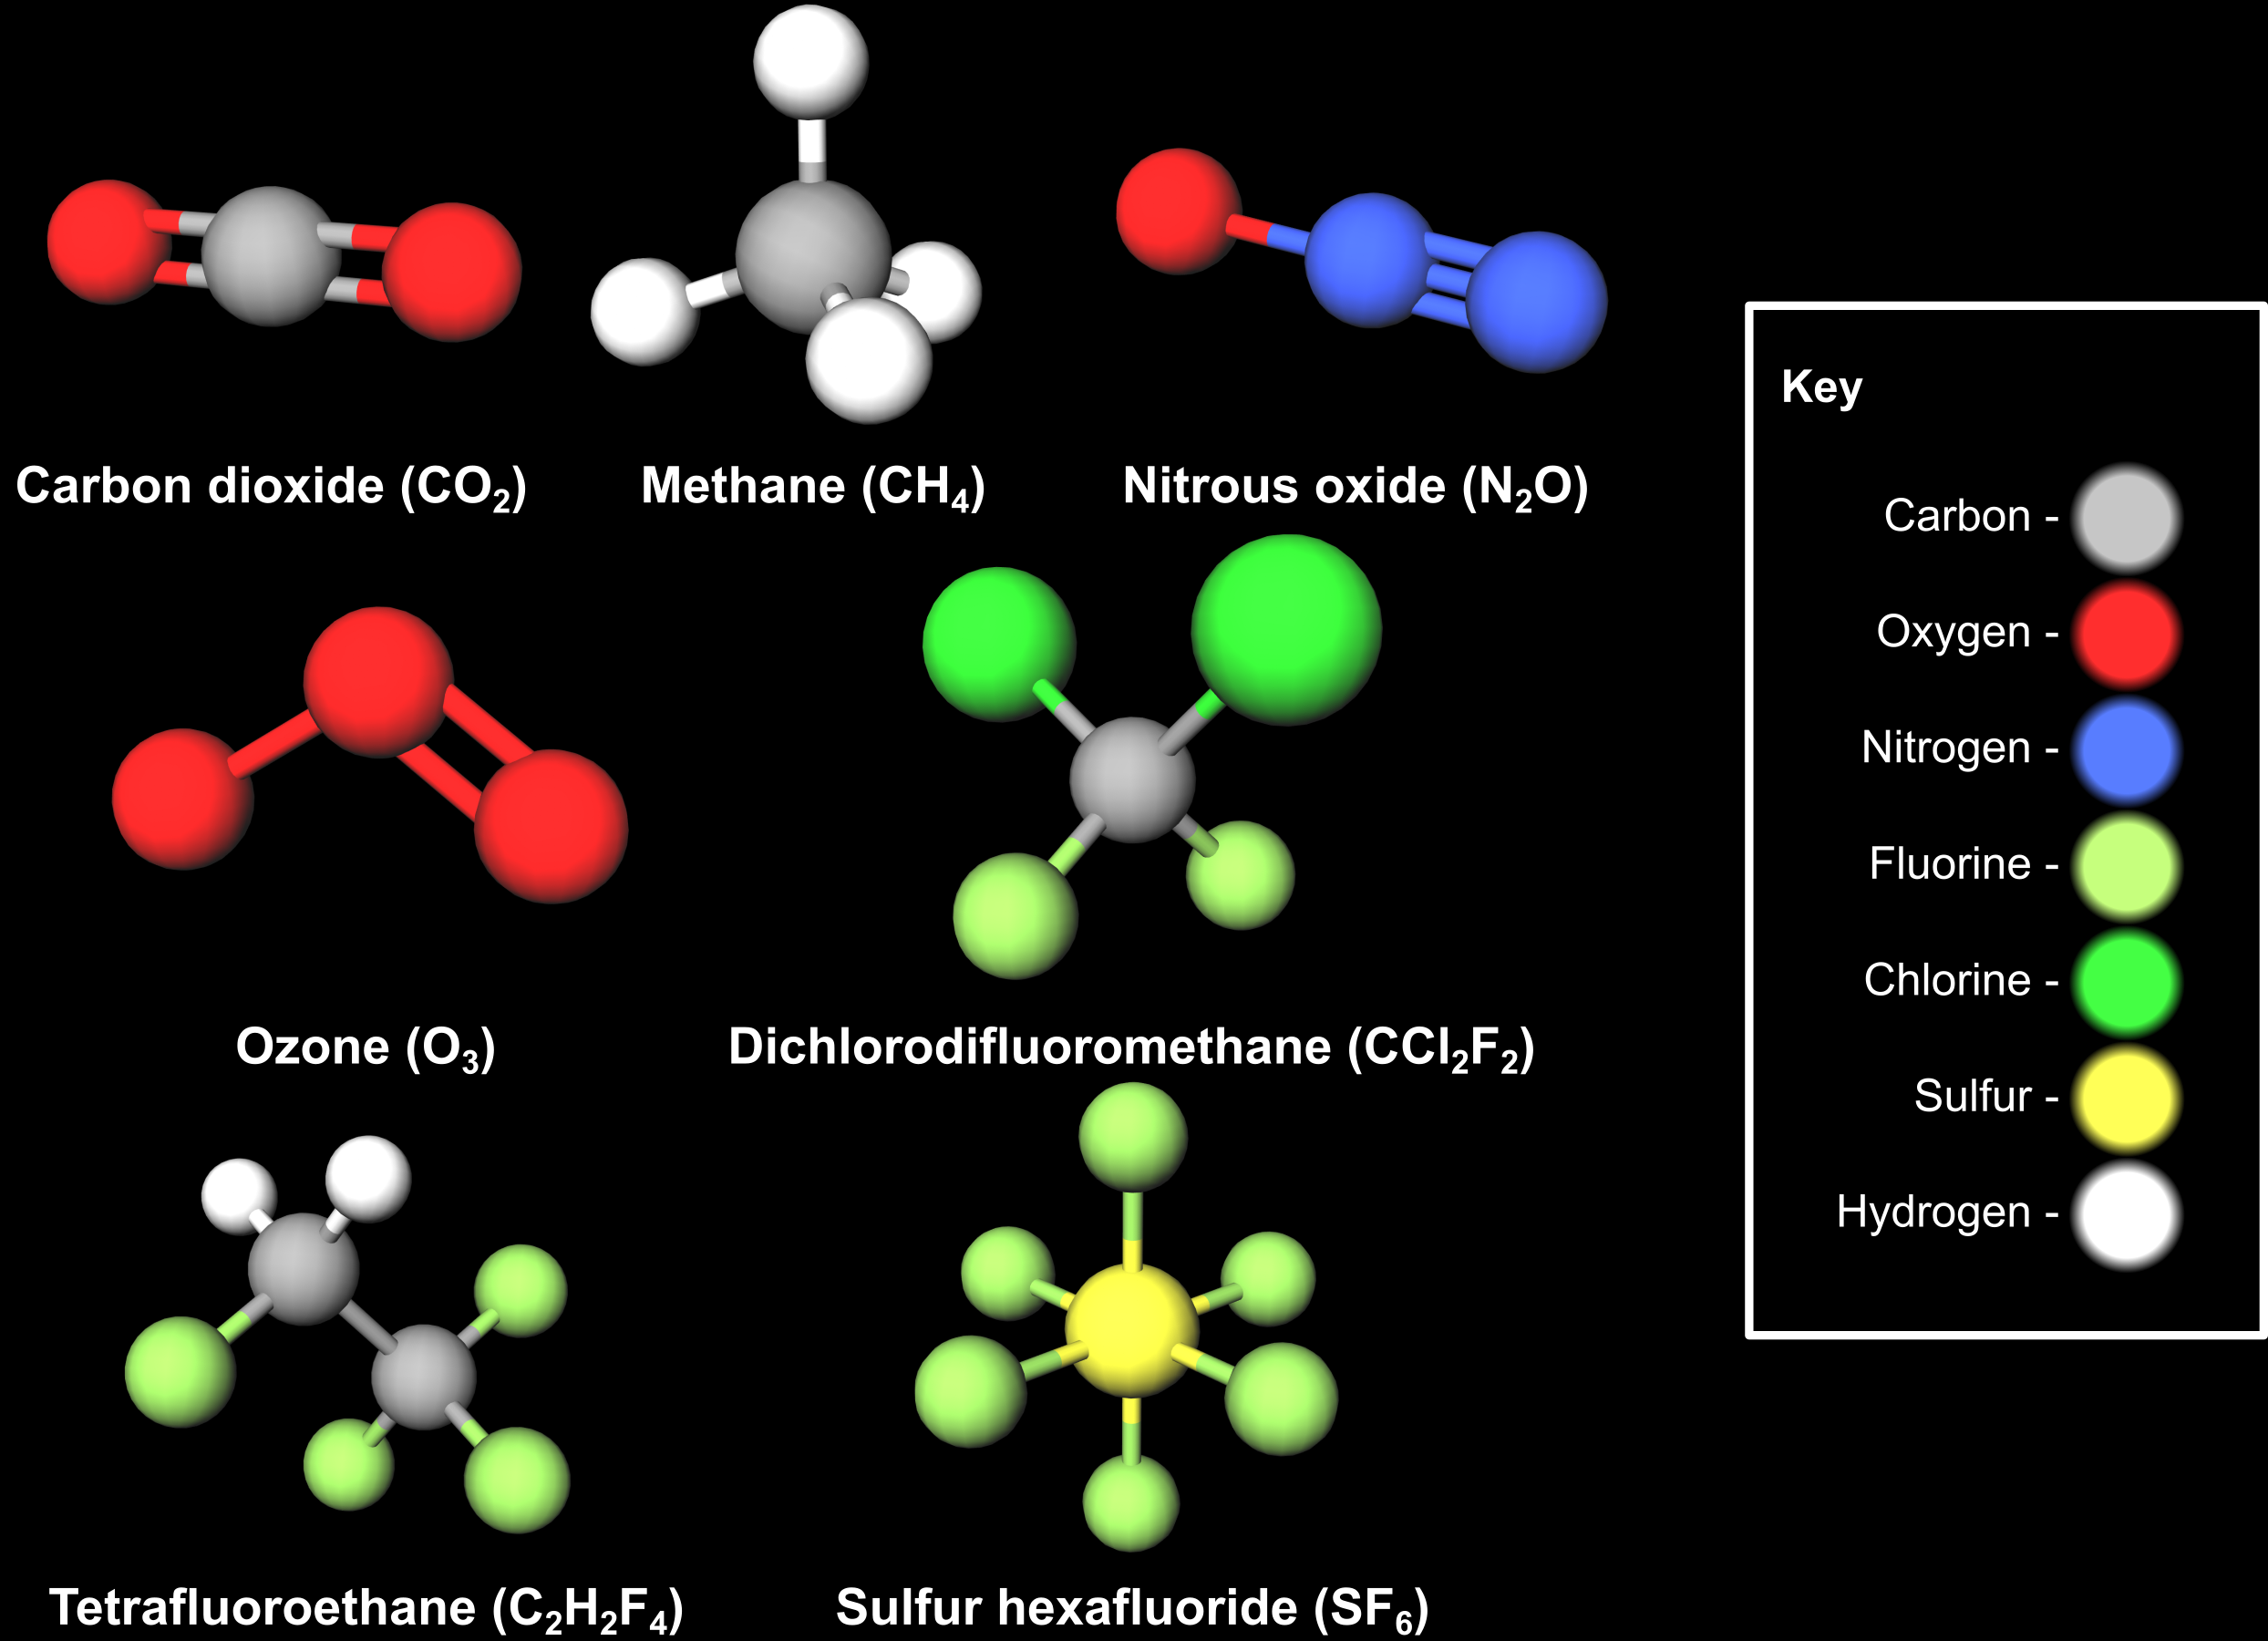 Molecular models of several greenhouse gases, indicating the elements present.